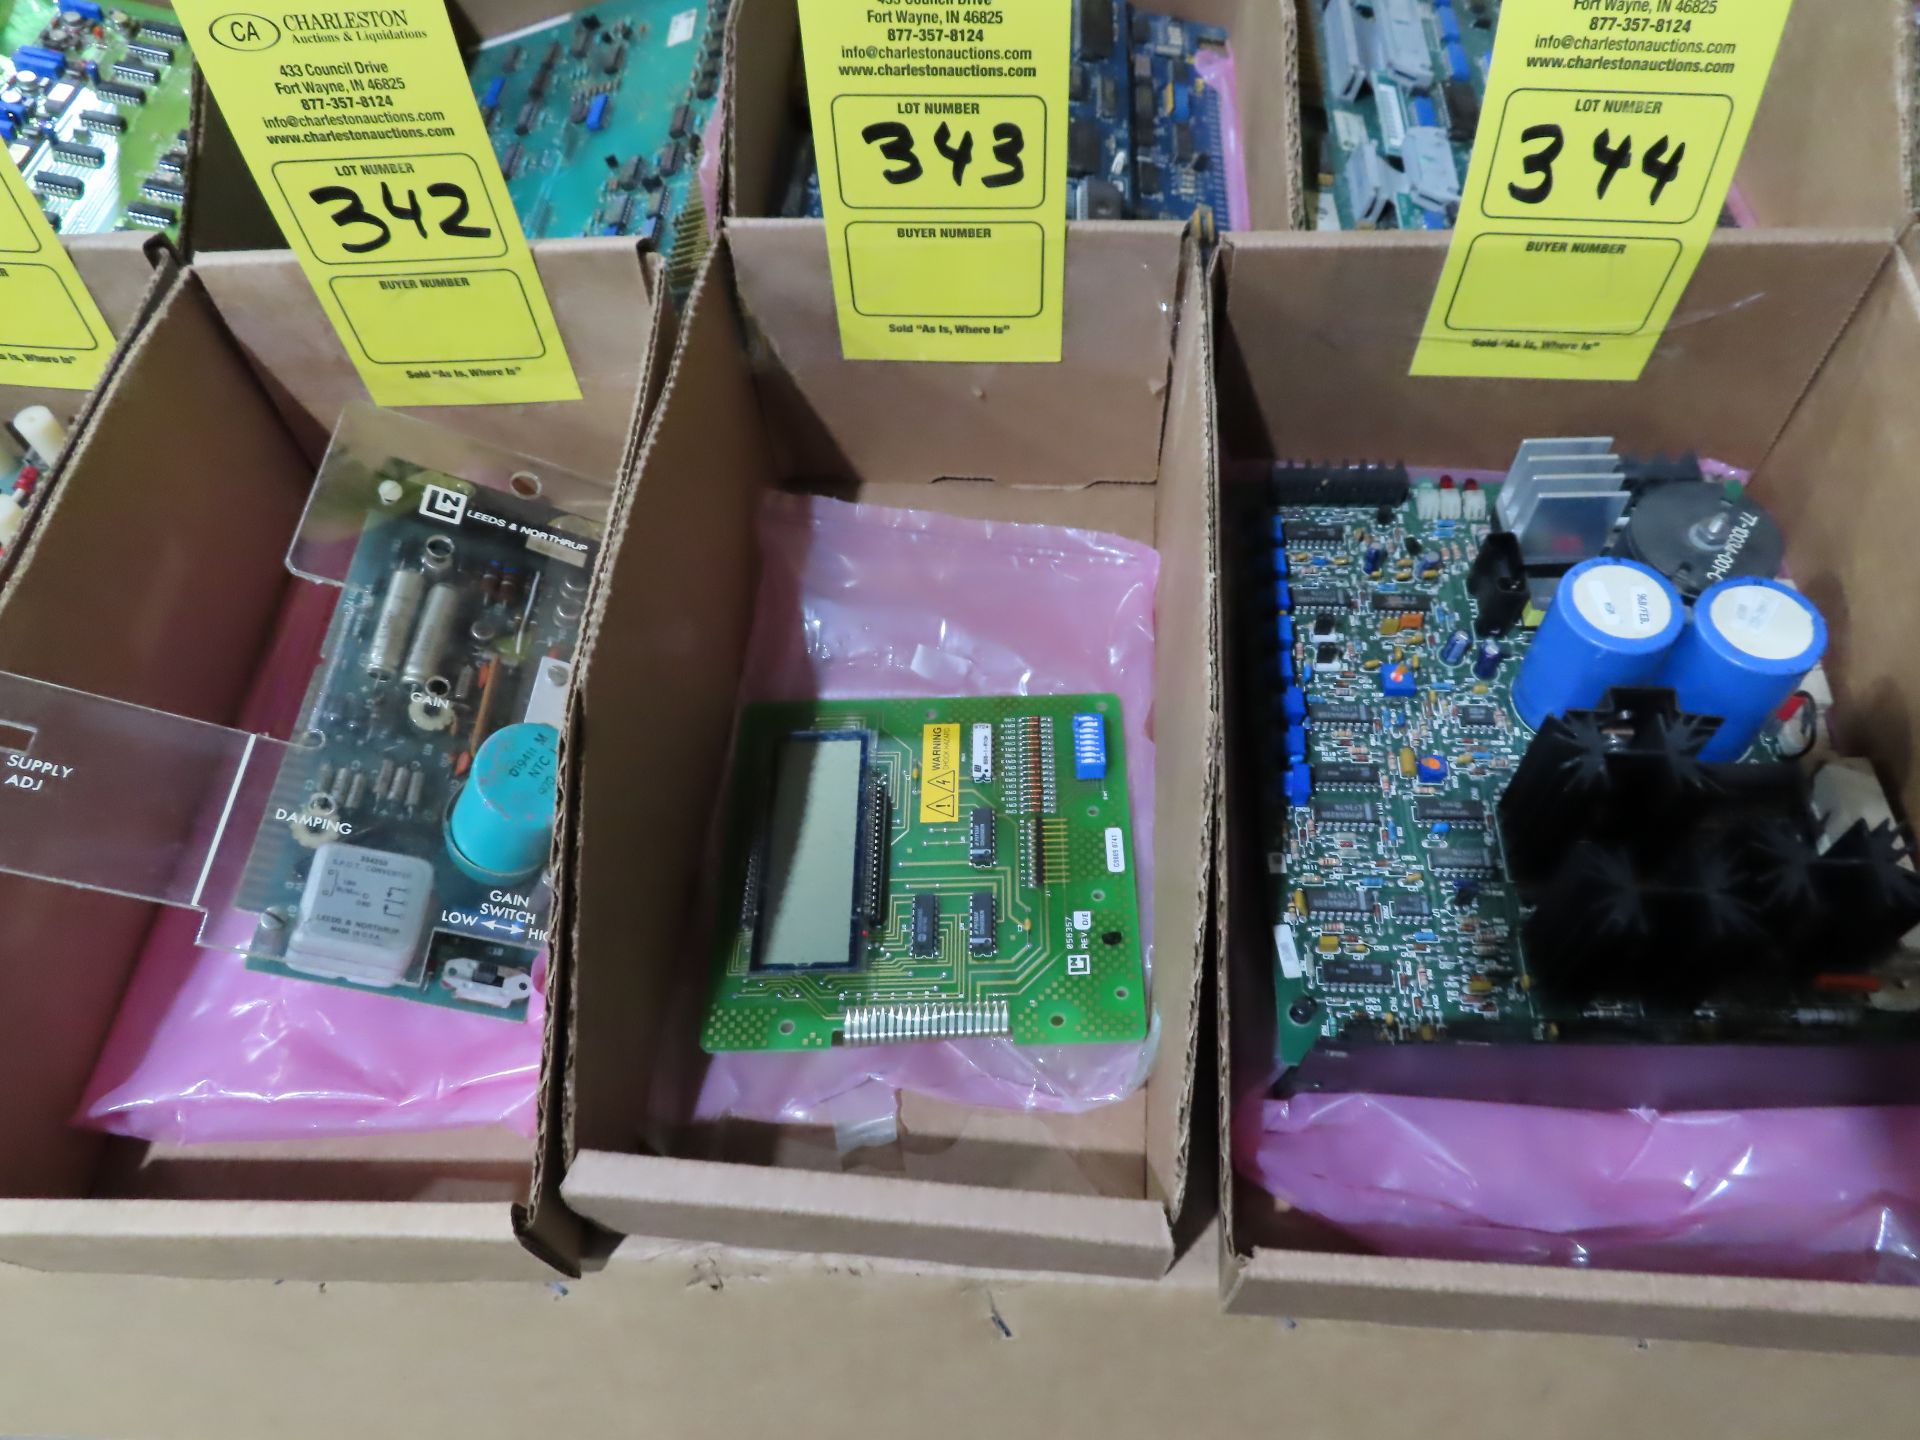 Leeds and Northrup cat 056357 lcd board, as always, with Brolyn LLC auctions, all lots can be picked